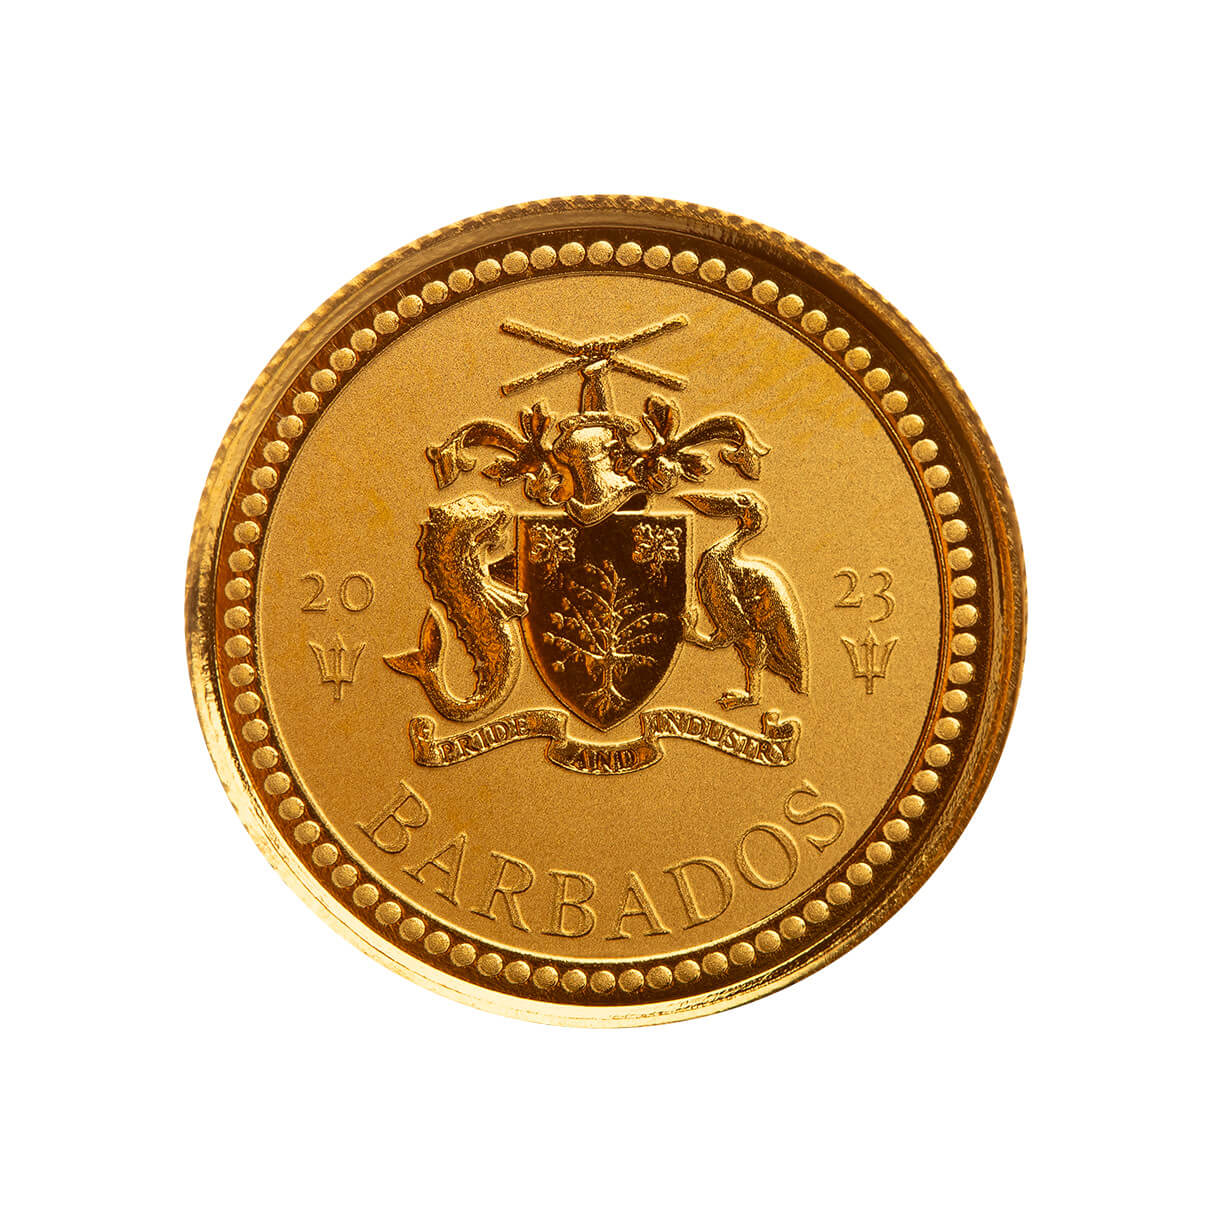 1 cent coin Barbados - Exchange yours for cash today